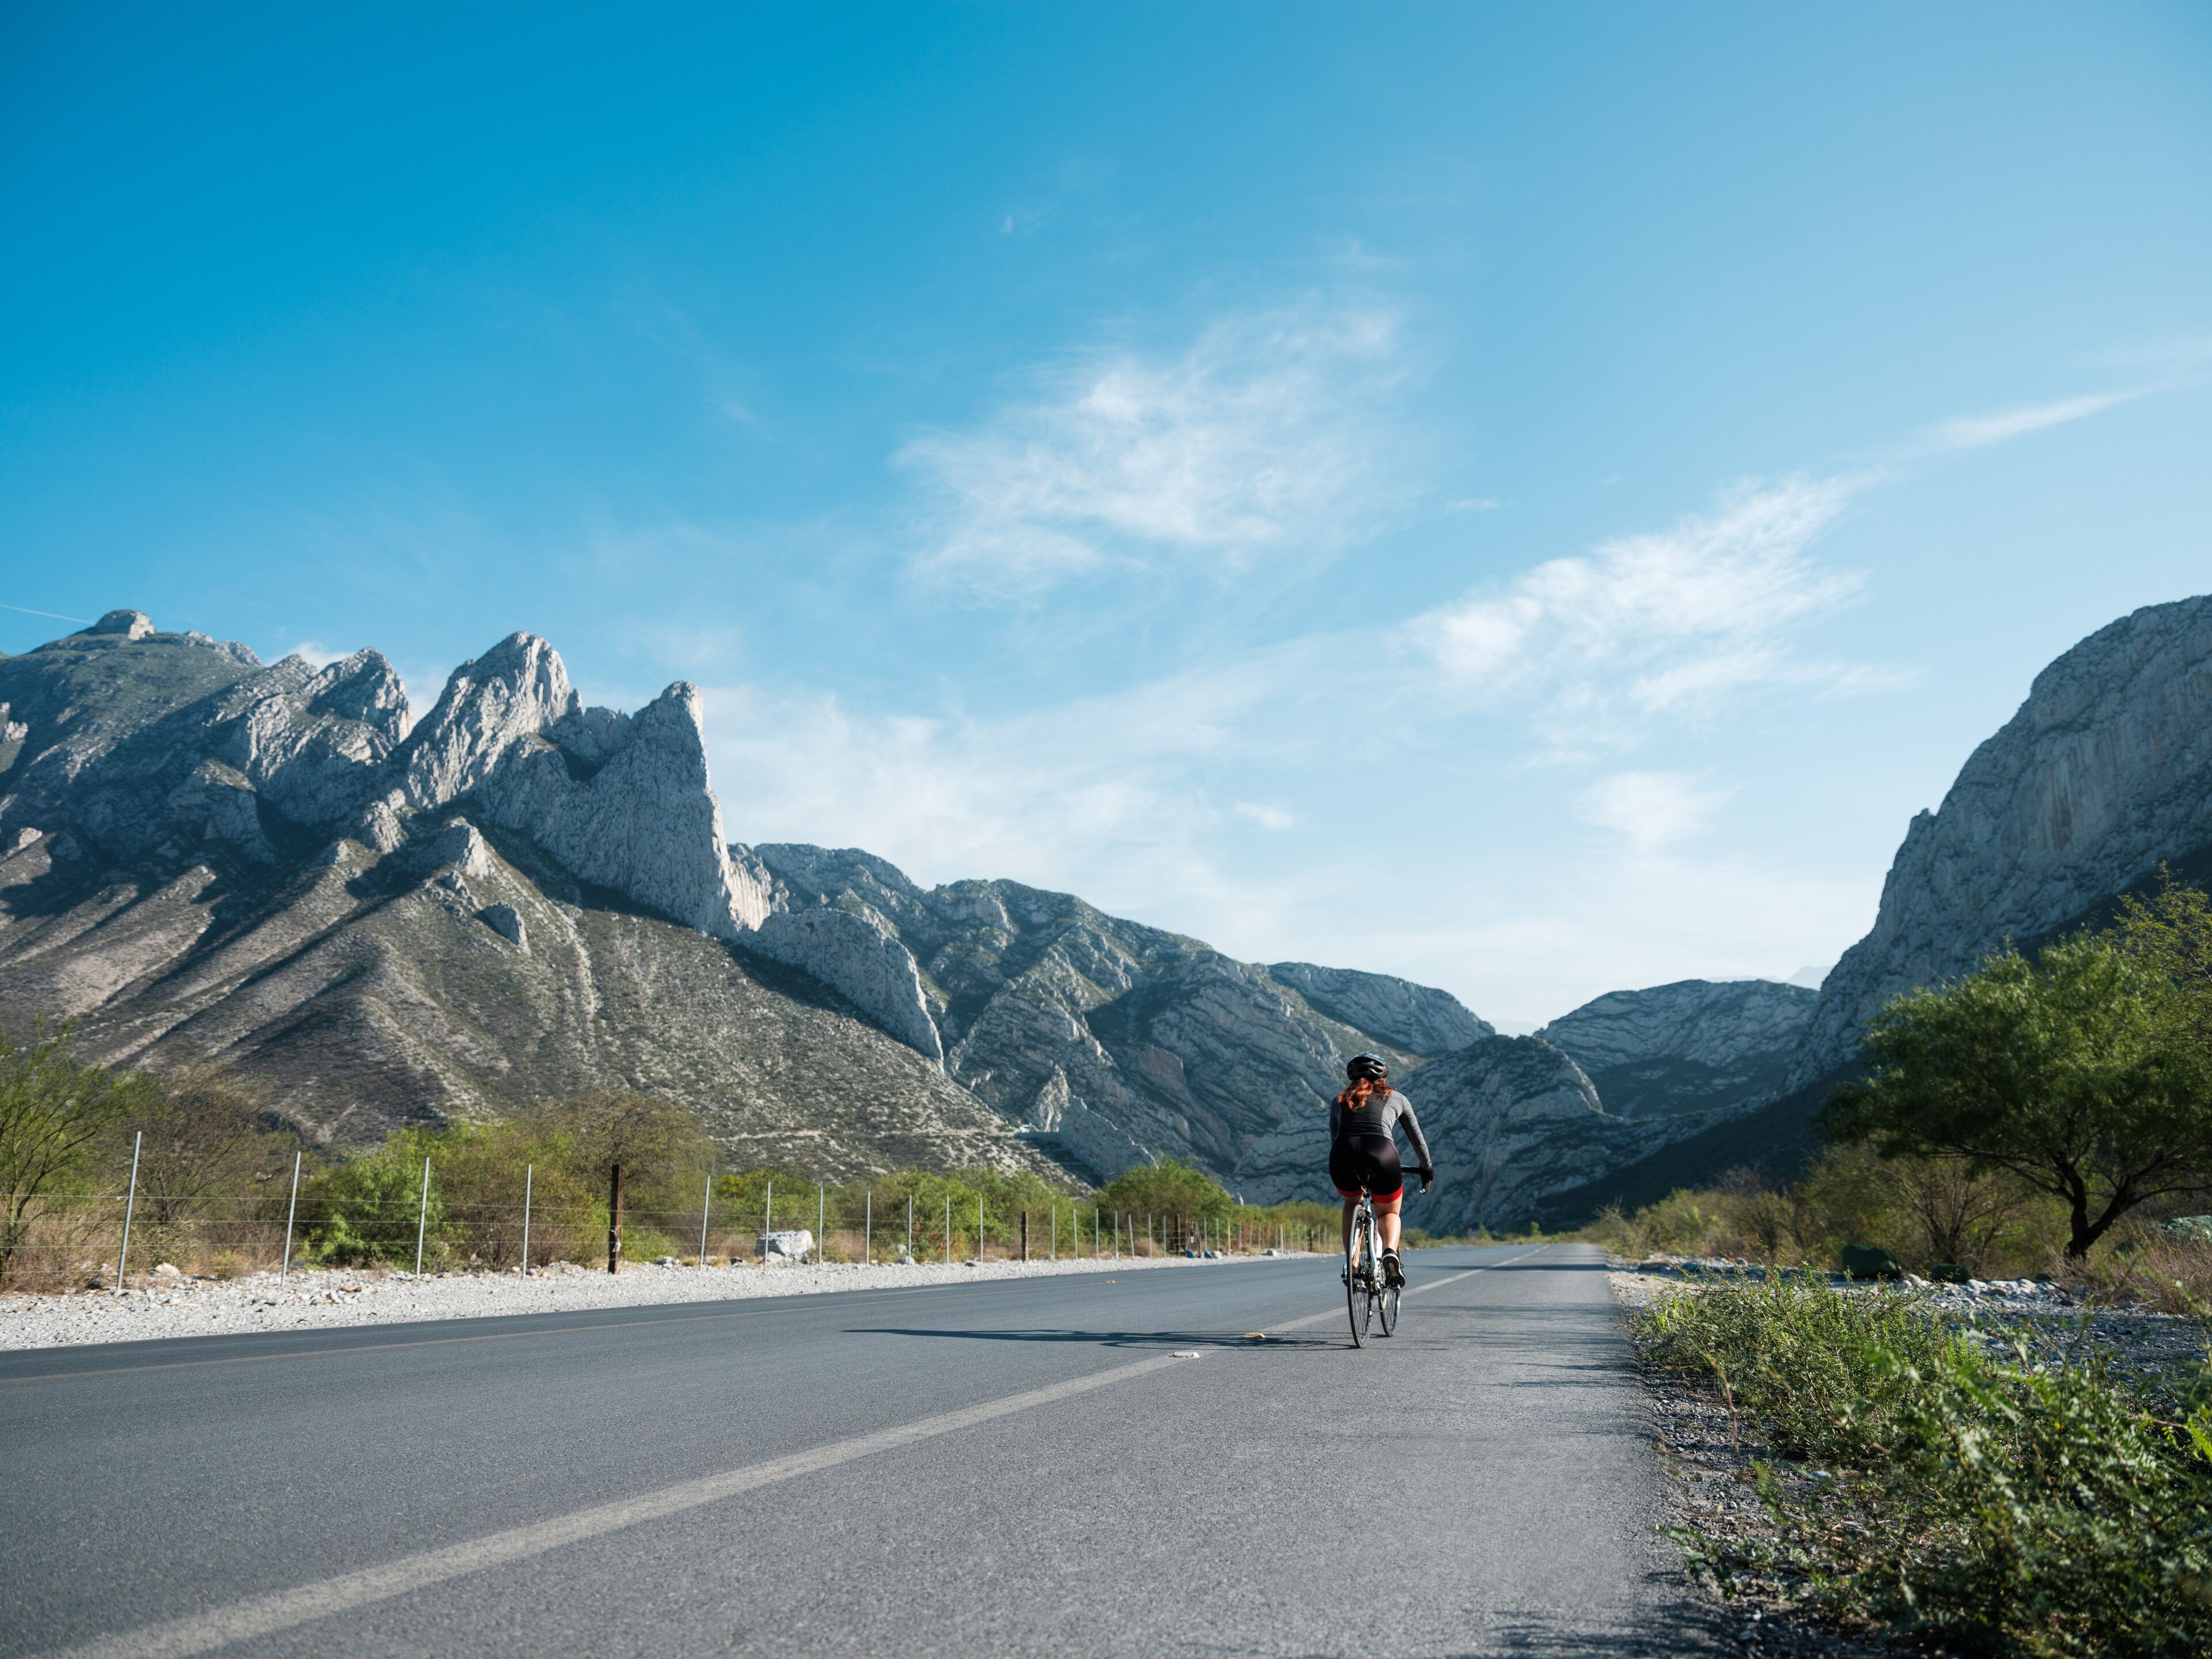 Nice view of some mountains and a blue sky with the back view of a cyclist on the road.